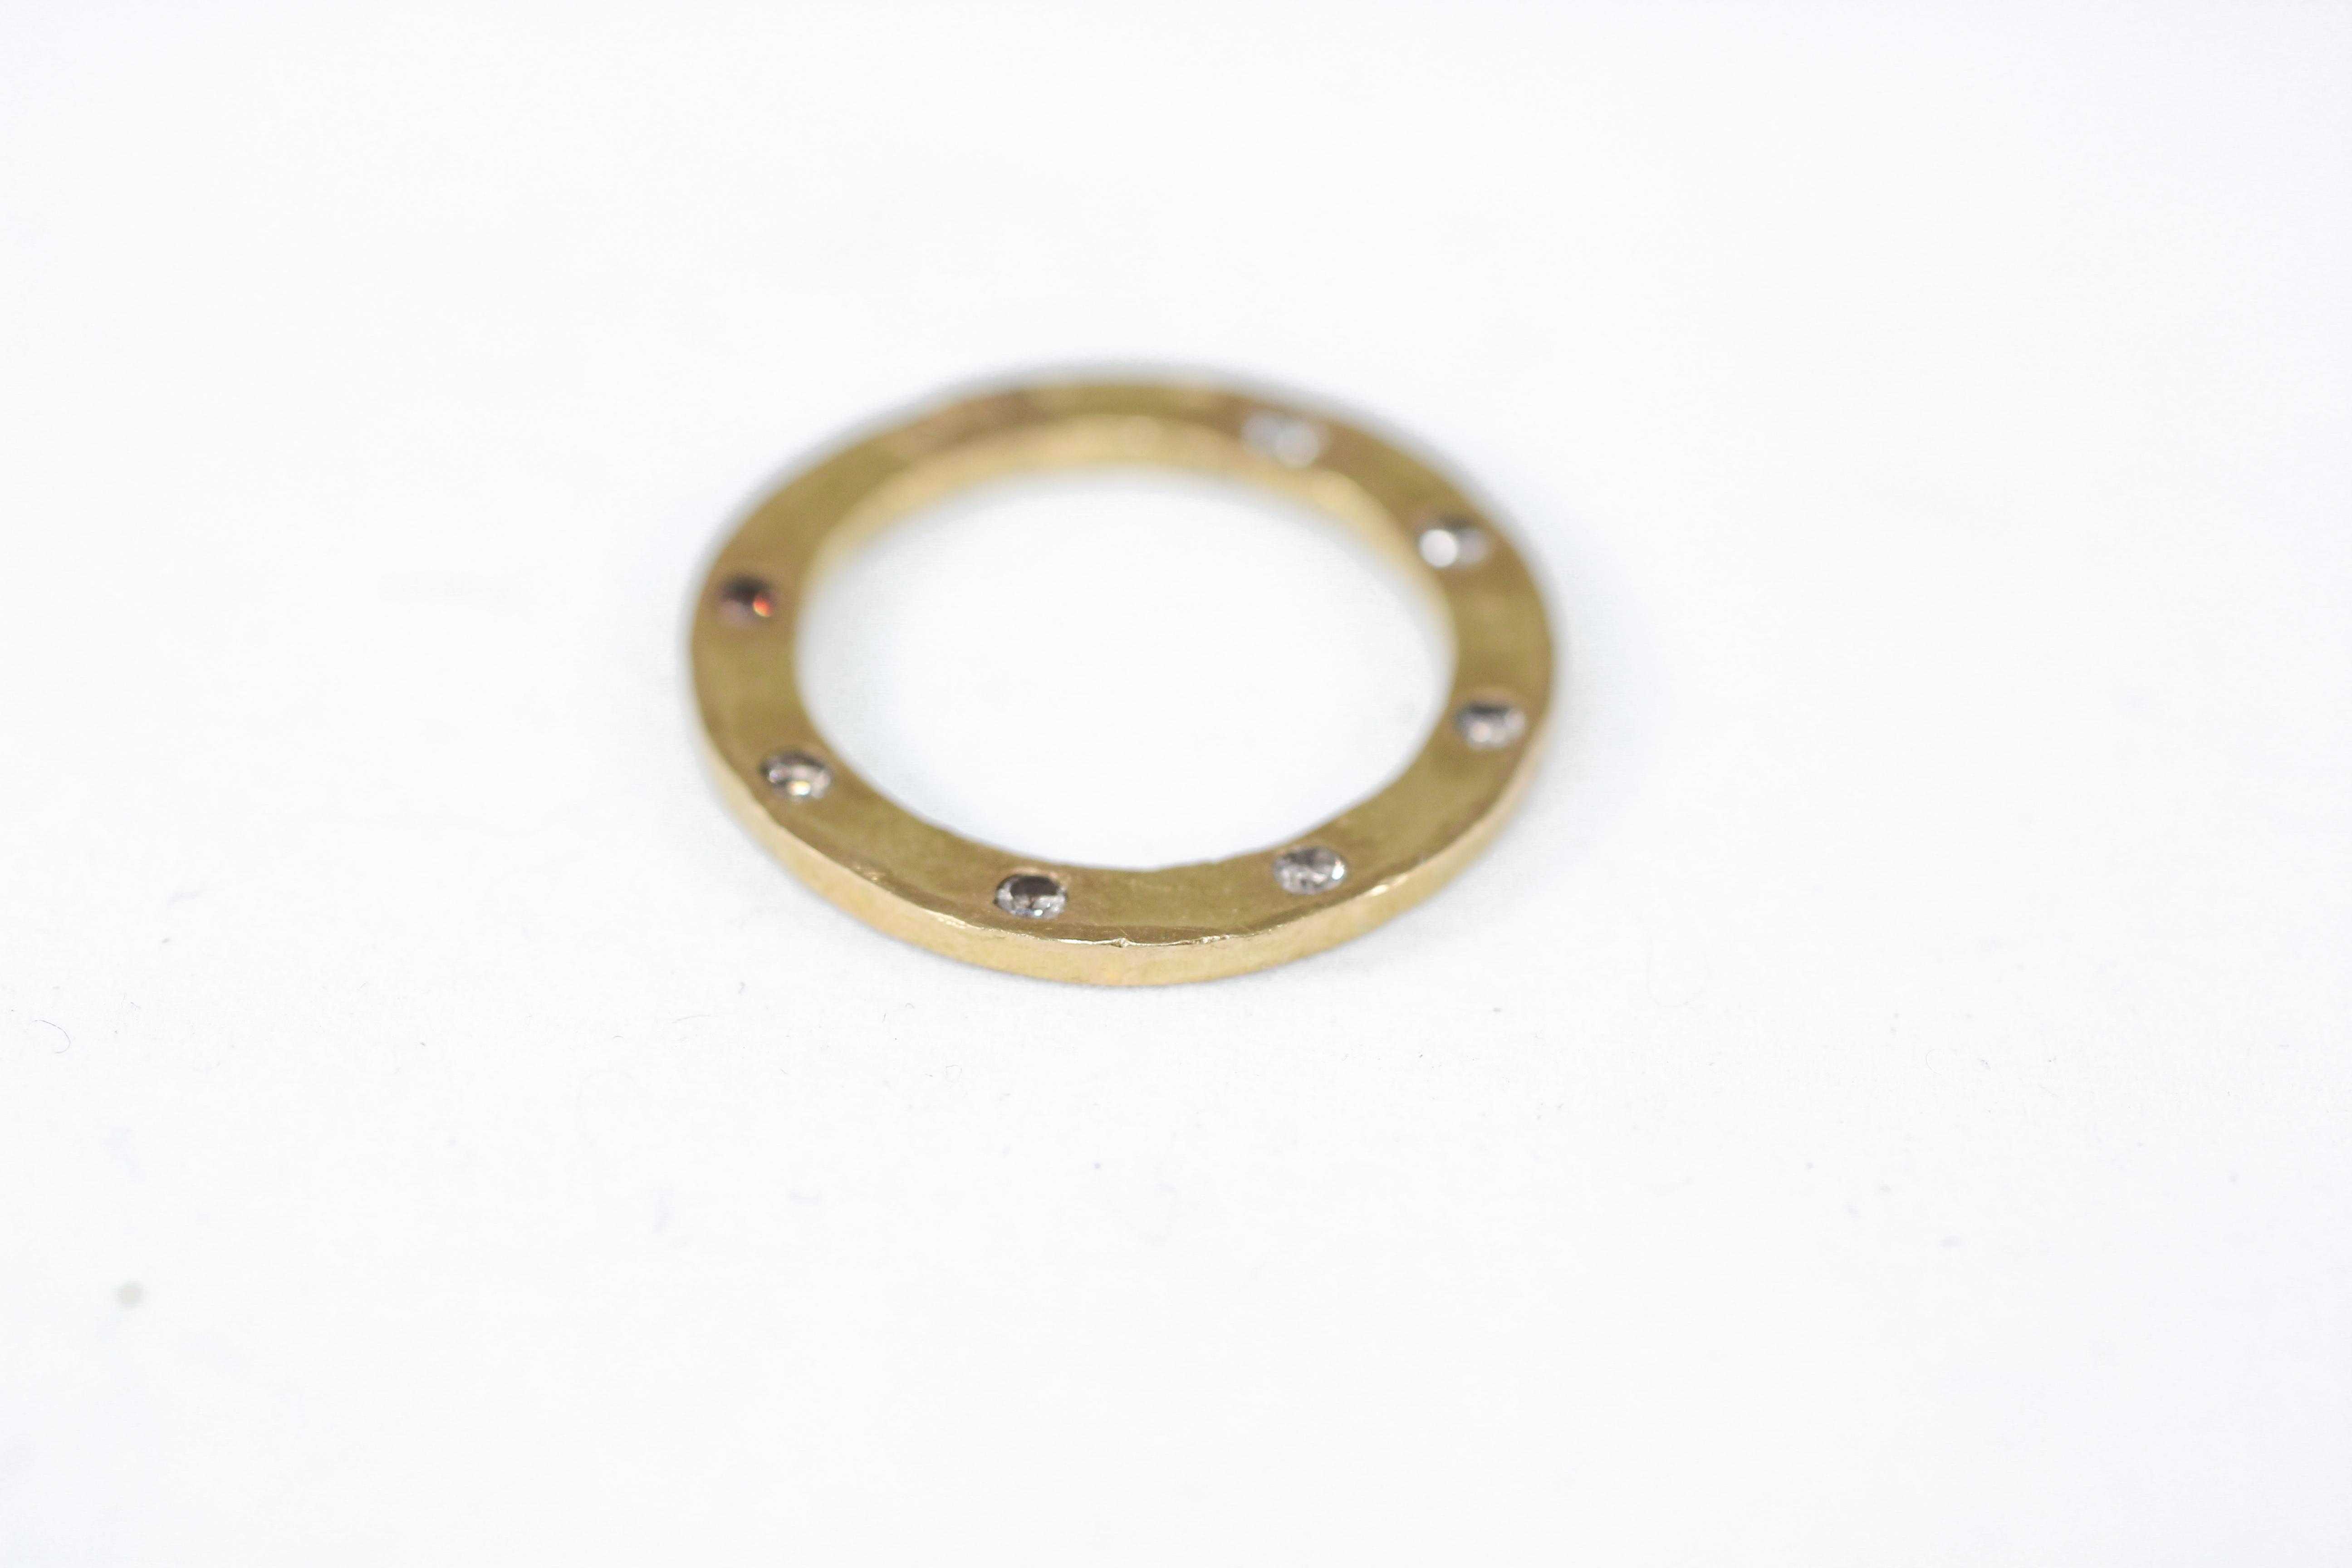 A bridal or wedding ring featuring 7 champagne diamonds in recycled 22k gold. A contemporary unisex wedding or bridal ring designed and handcrafted by AB Jewelry NYC. The whimsy of the Dial design is a peekaboo effect as the diamonds are set on the